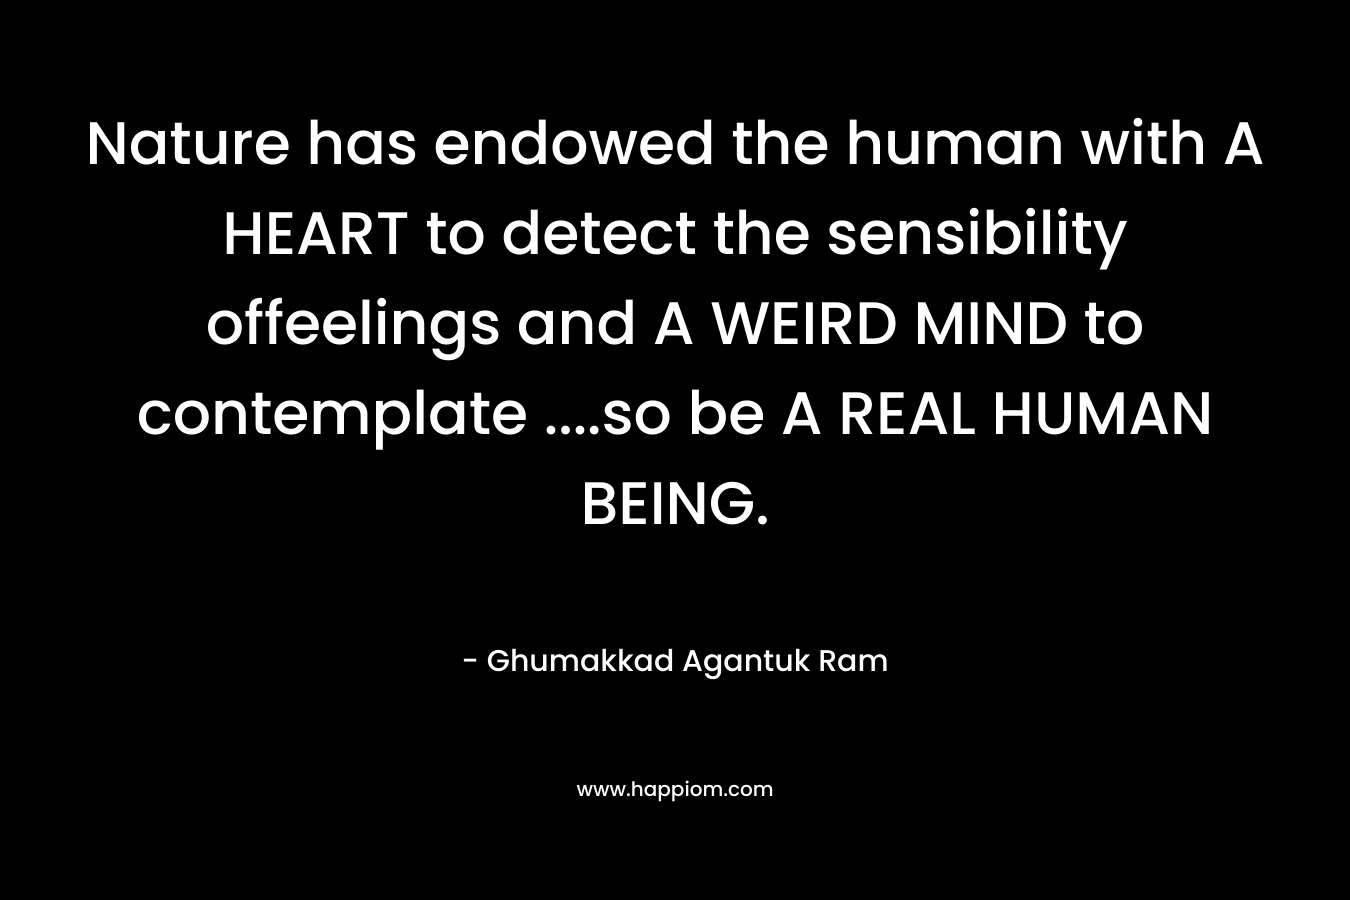 Nature has endowed the human with A HEART to detect the sensibility offeelings and A WEIRD MIND to contemplate ....so be A REAL HUMAN BEING.